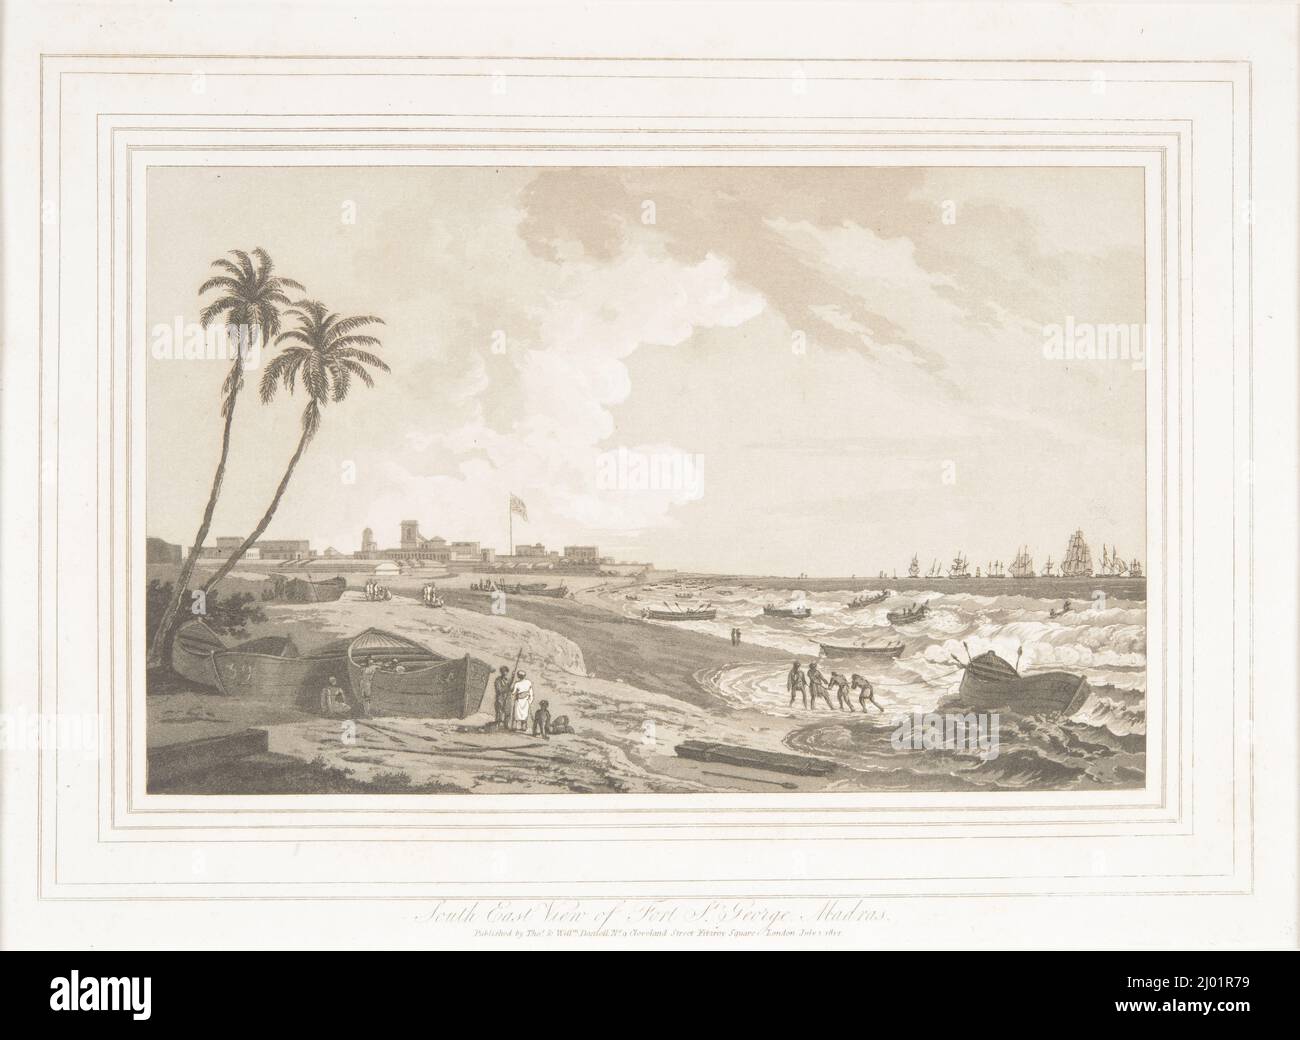 South East View of Fort St. George, Madras from 'Oriental Scenery, Quarto Prints'. Thomas Daniell (England, London, 1749-1840)Longman, Hurst, Rees, Orme and Brown (England, London)Free-School Press (England, London)William Daniell (England, London, 1769-1837). England, London, July 1, 1812. Prints; engravings. Aquatint engraving Stock Photo